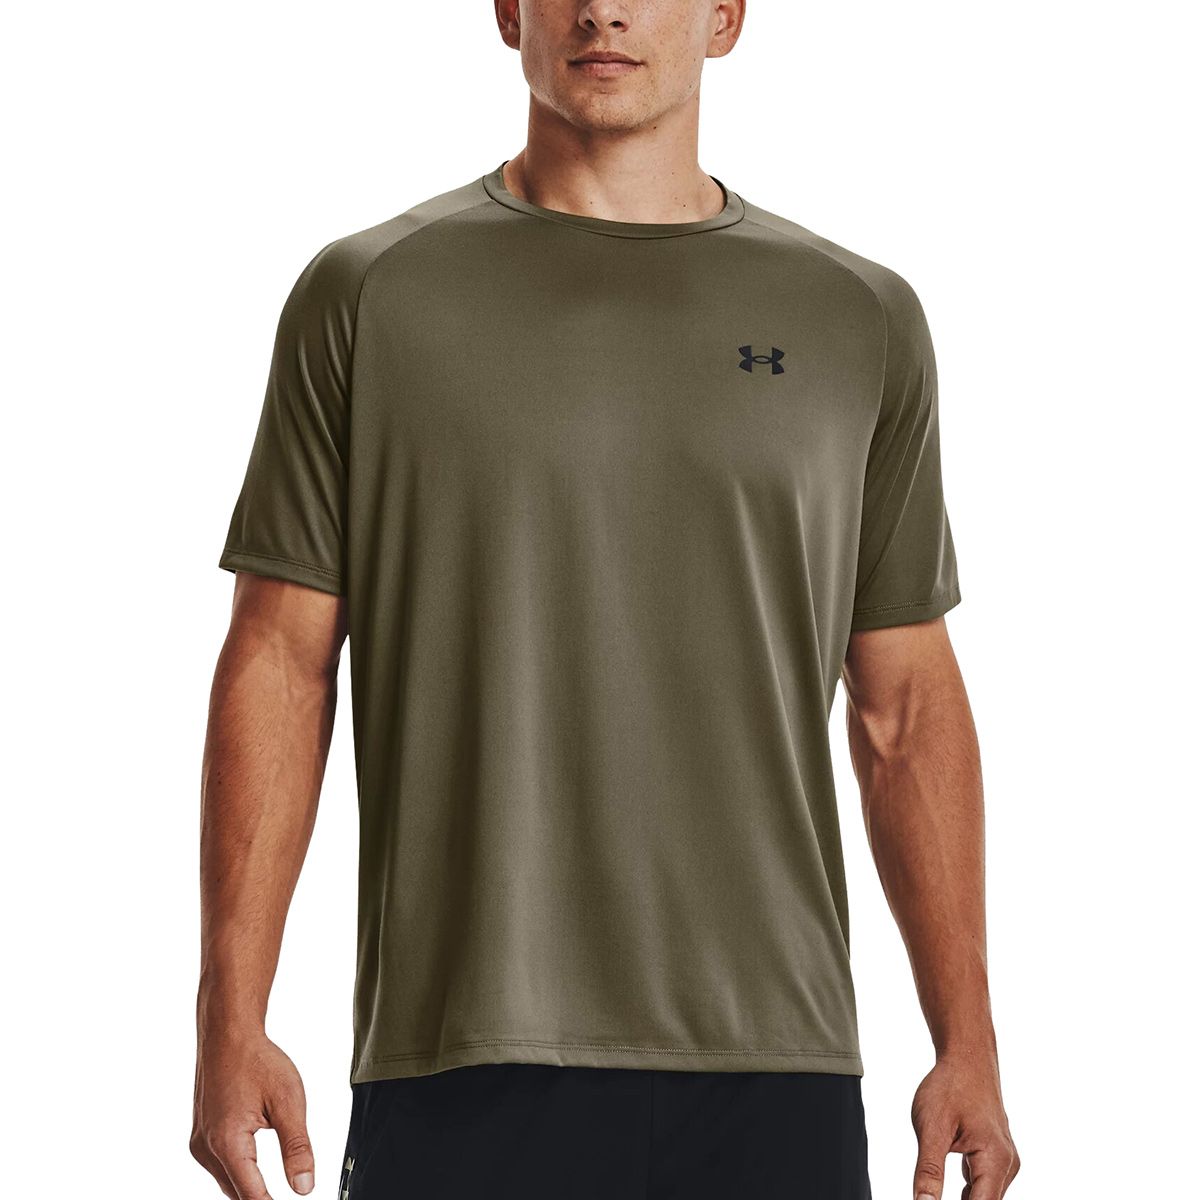 Details about   Fitwear Omni-Tech TeeMen's Fitted Fitness T-Shirt 